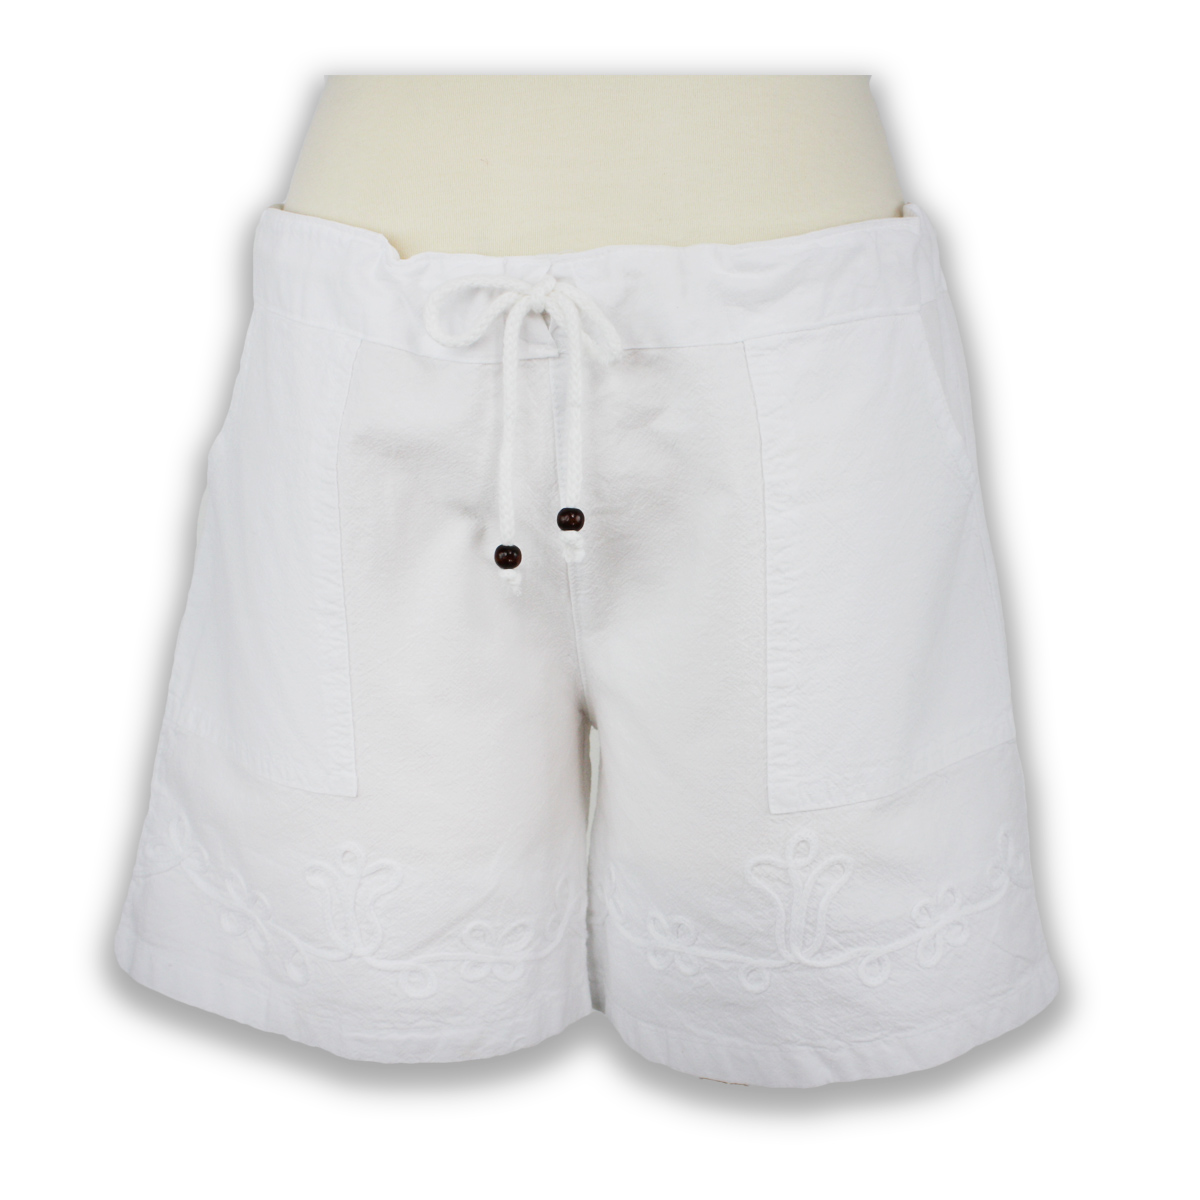 Giocam Women’s Short’s – Short and Simple- White